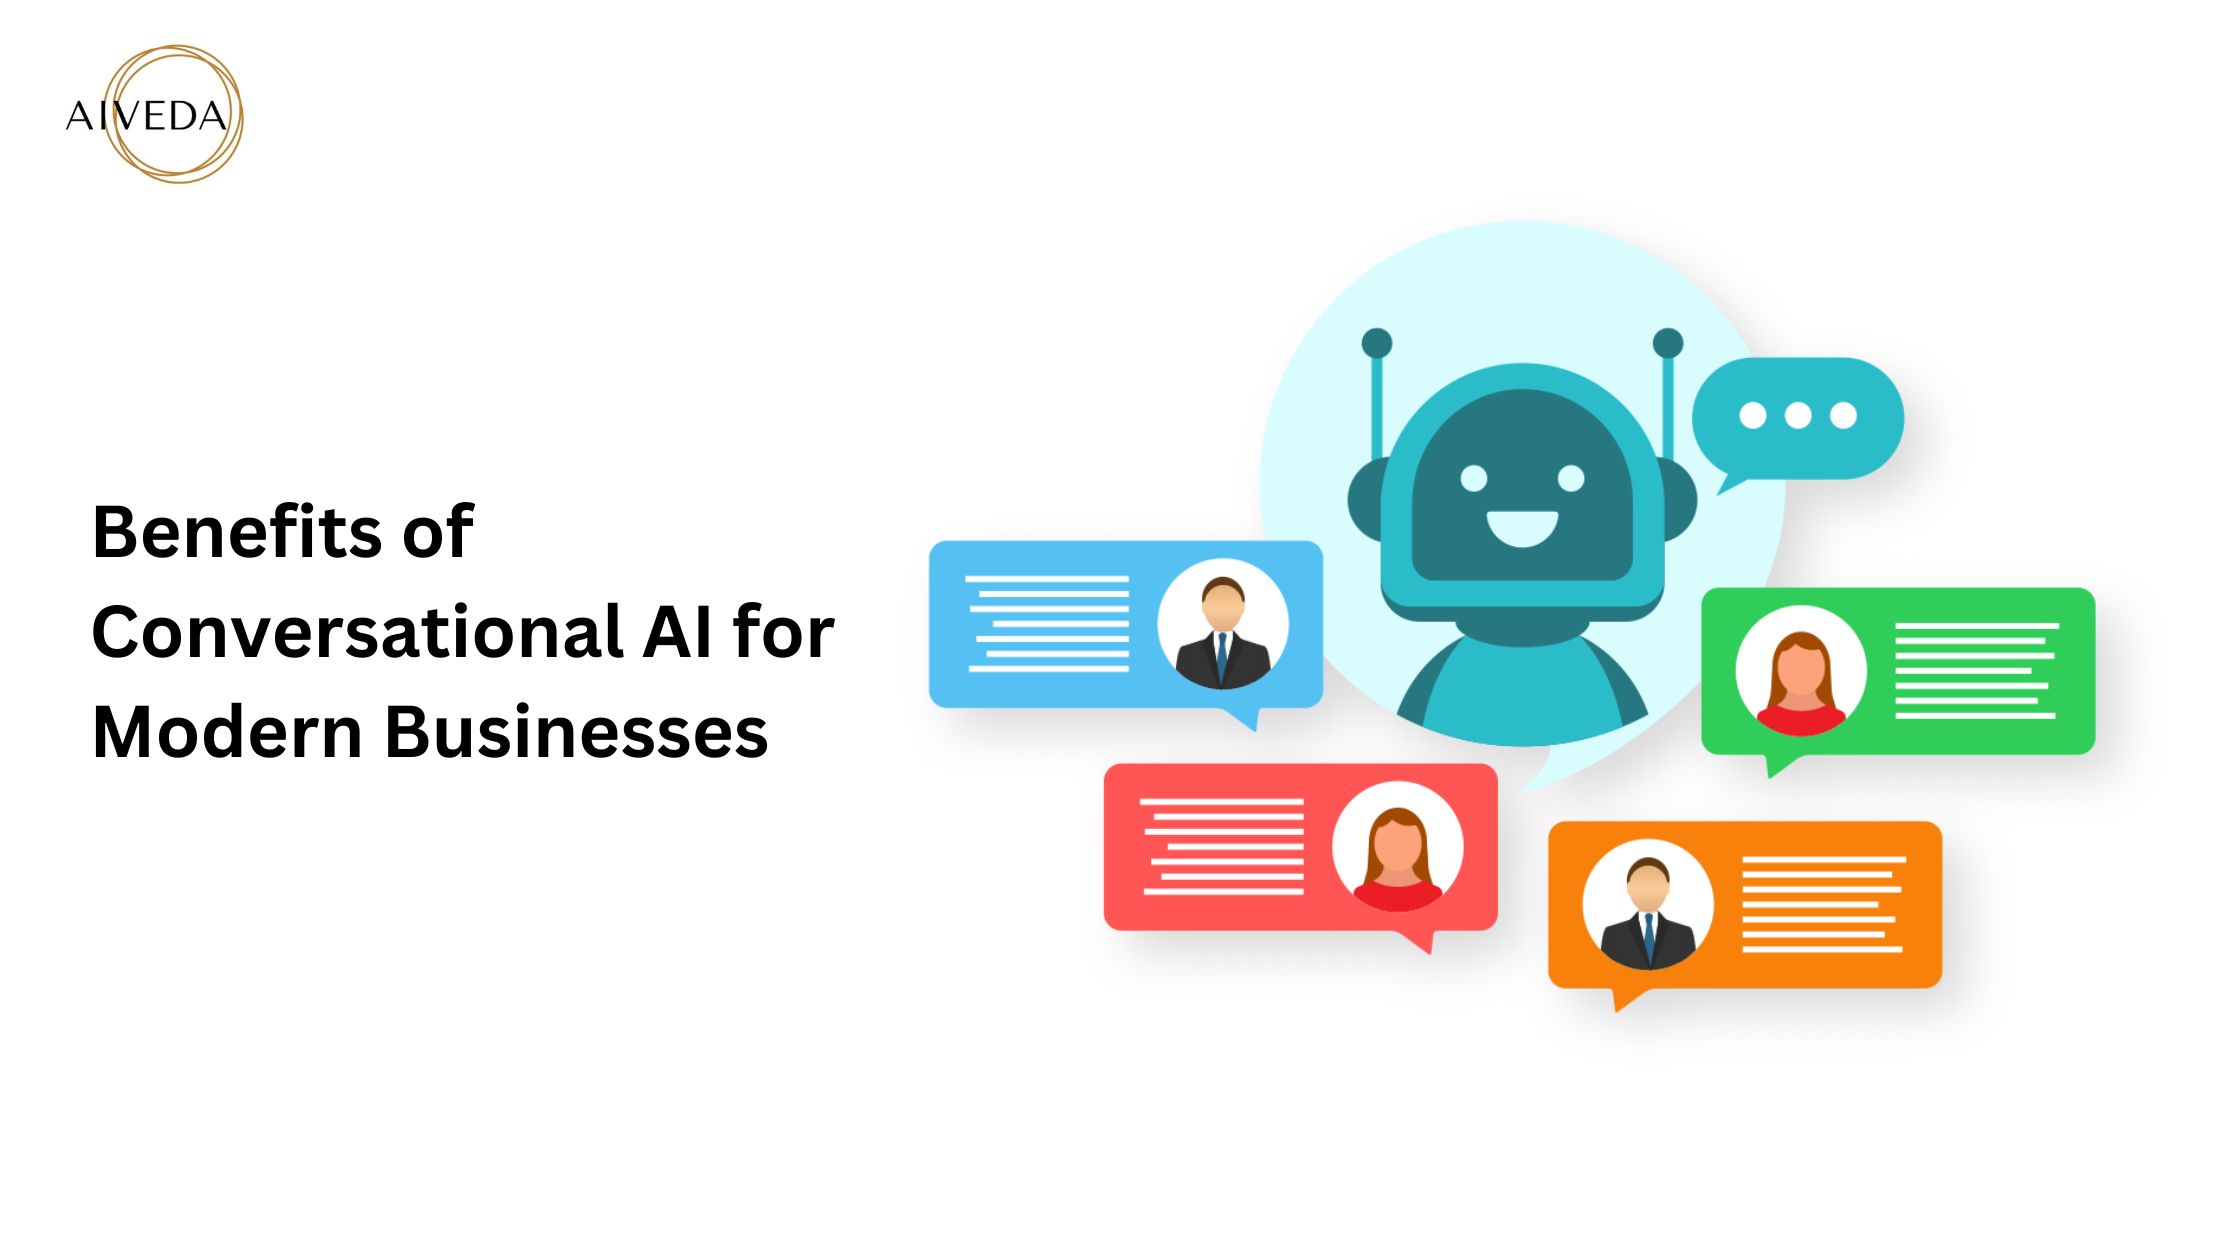 Exploring the Benefits of Conversational AI for Modern Businesses